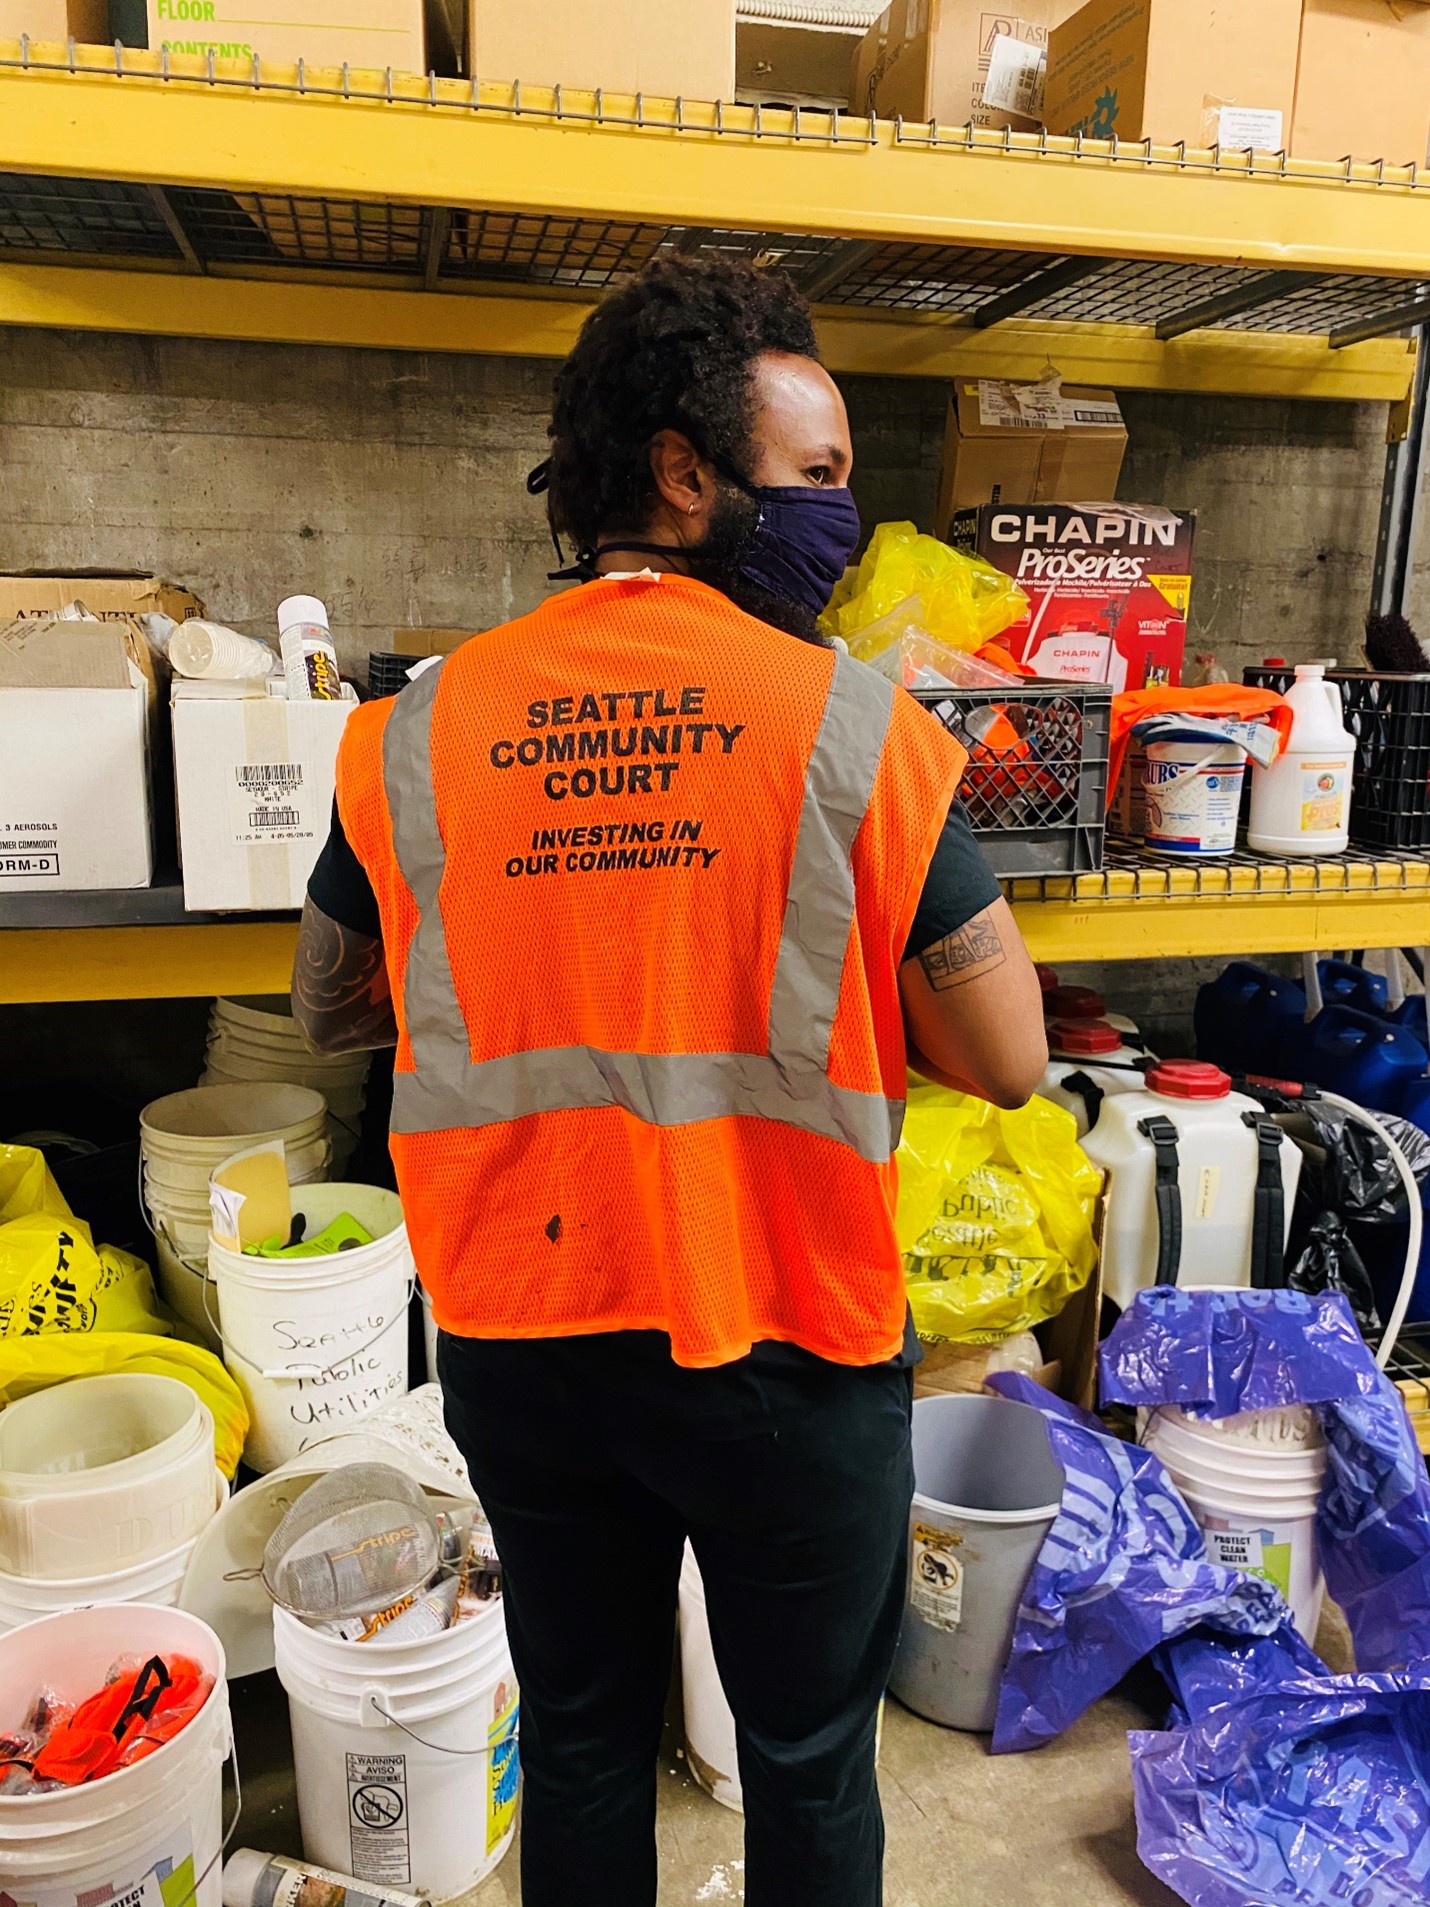 Curtis wearing an orange safety vest that says "Seattle Community Court: Investing in our Community" on the back